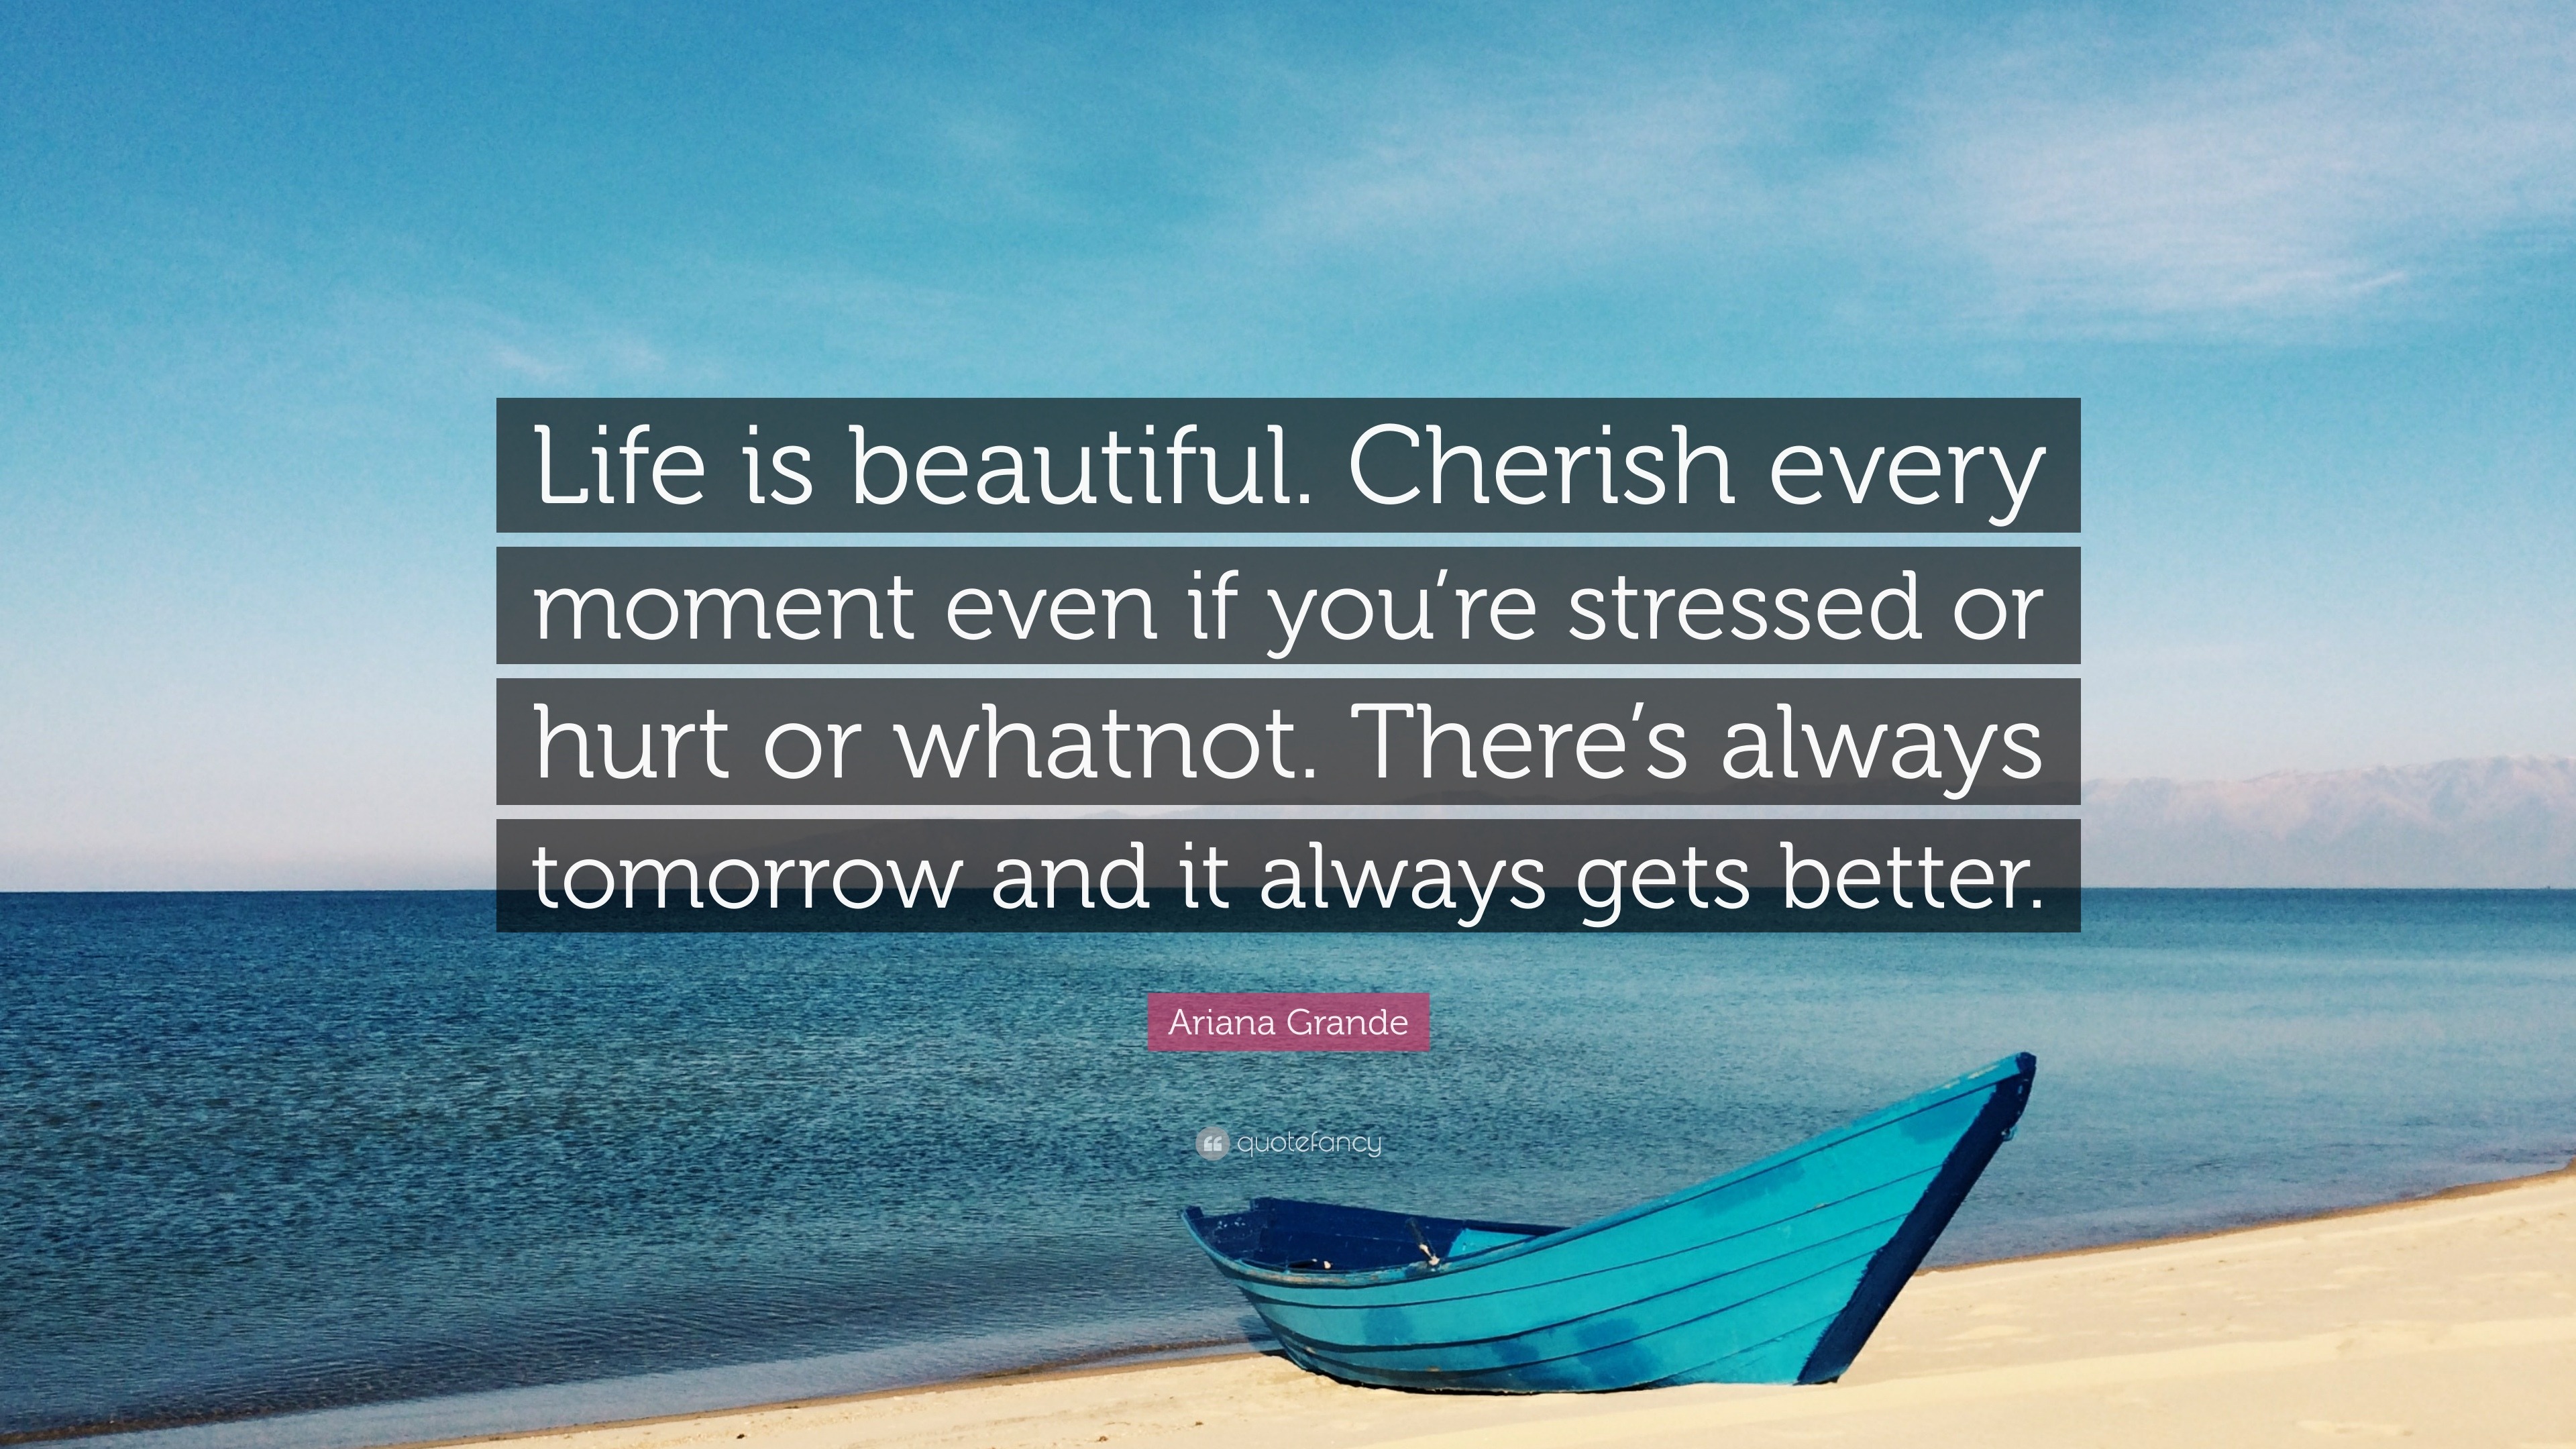 Ariana Grande Quote “Life is beautiful Cherish every moment even if you